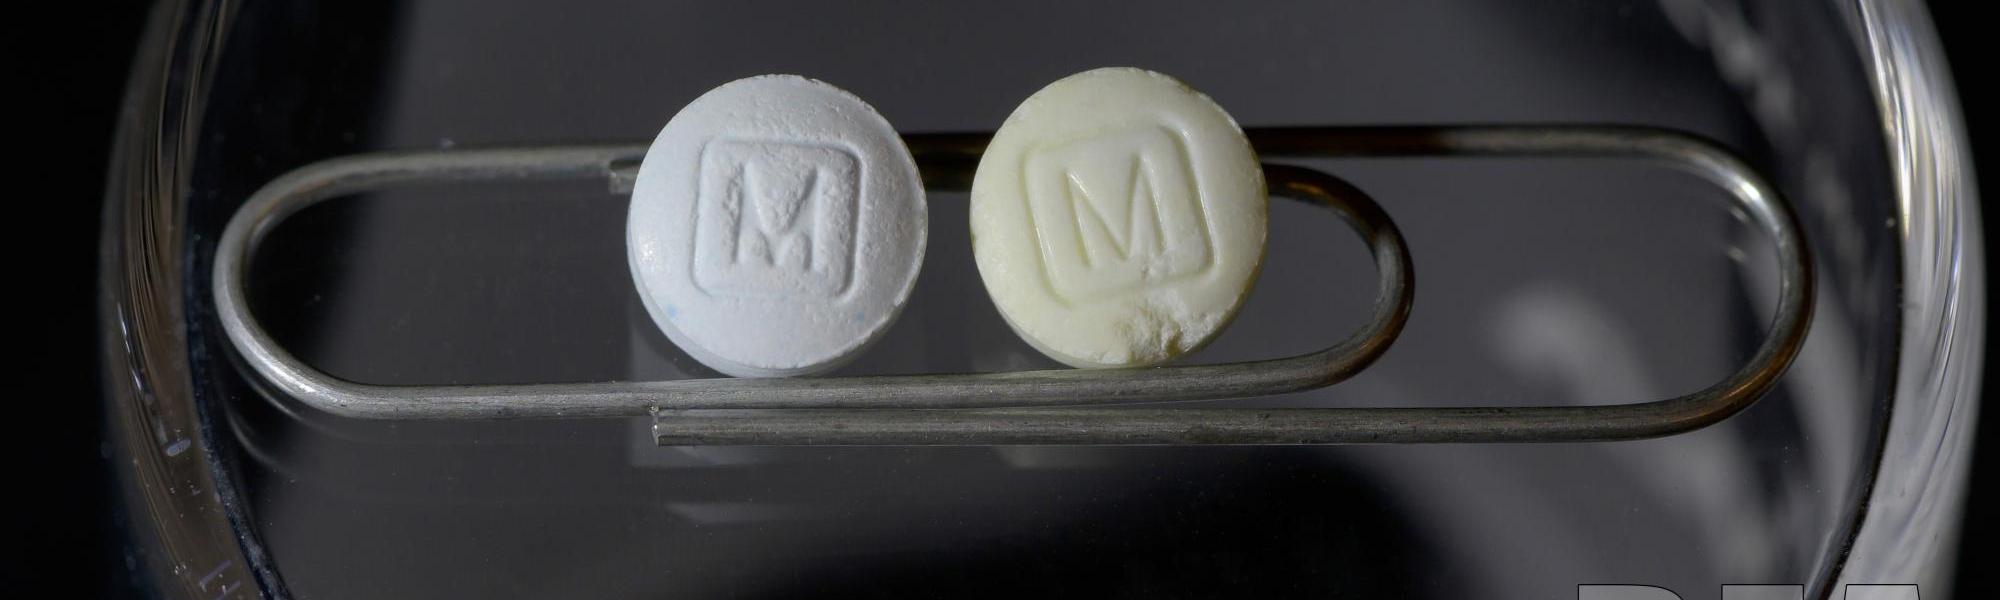 Comparison between authentic and counterfeit oxycontin